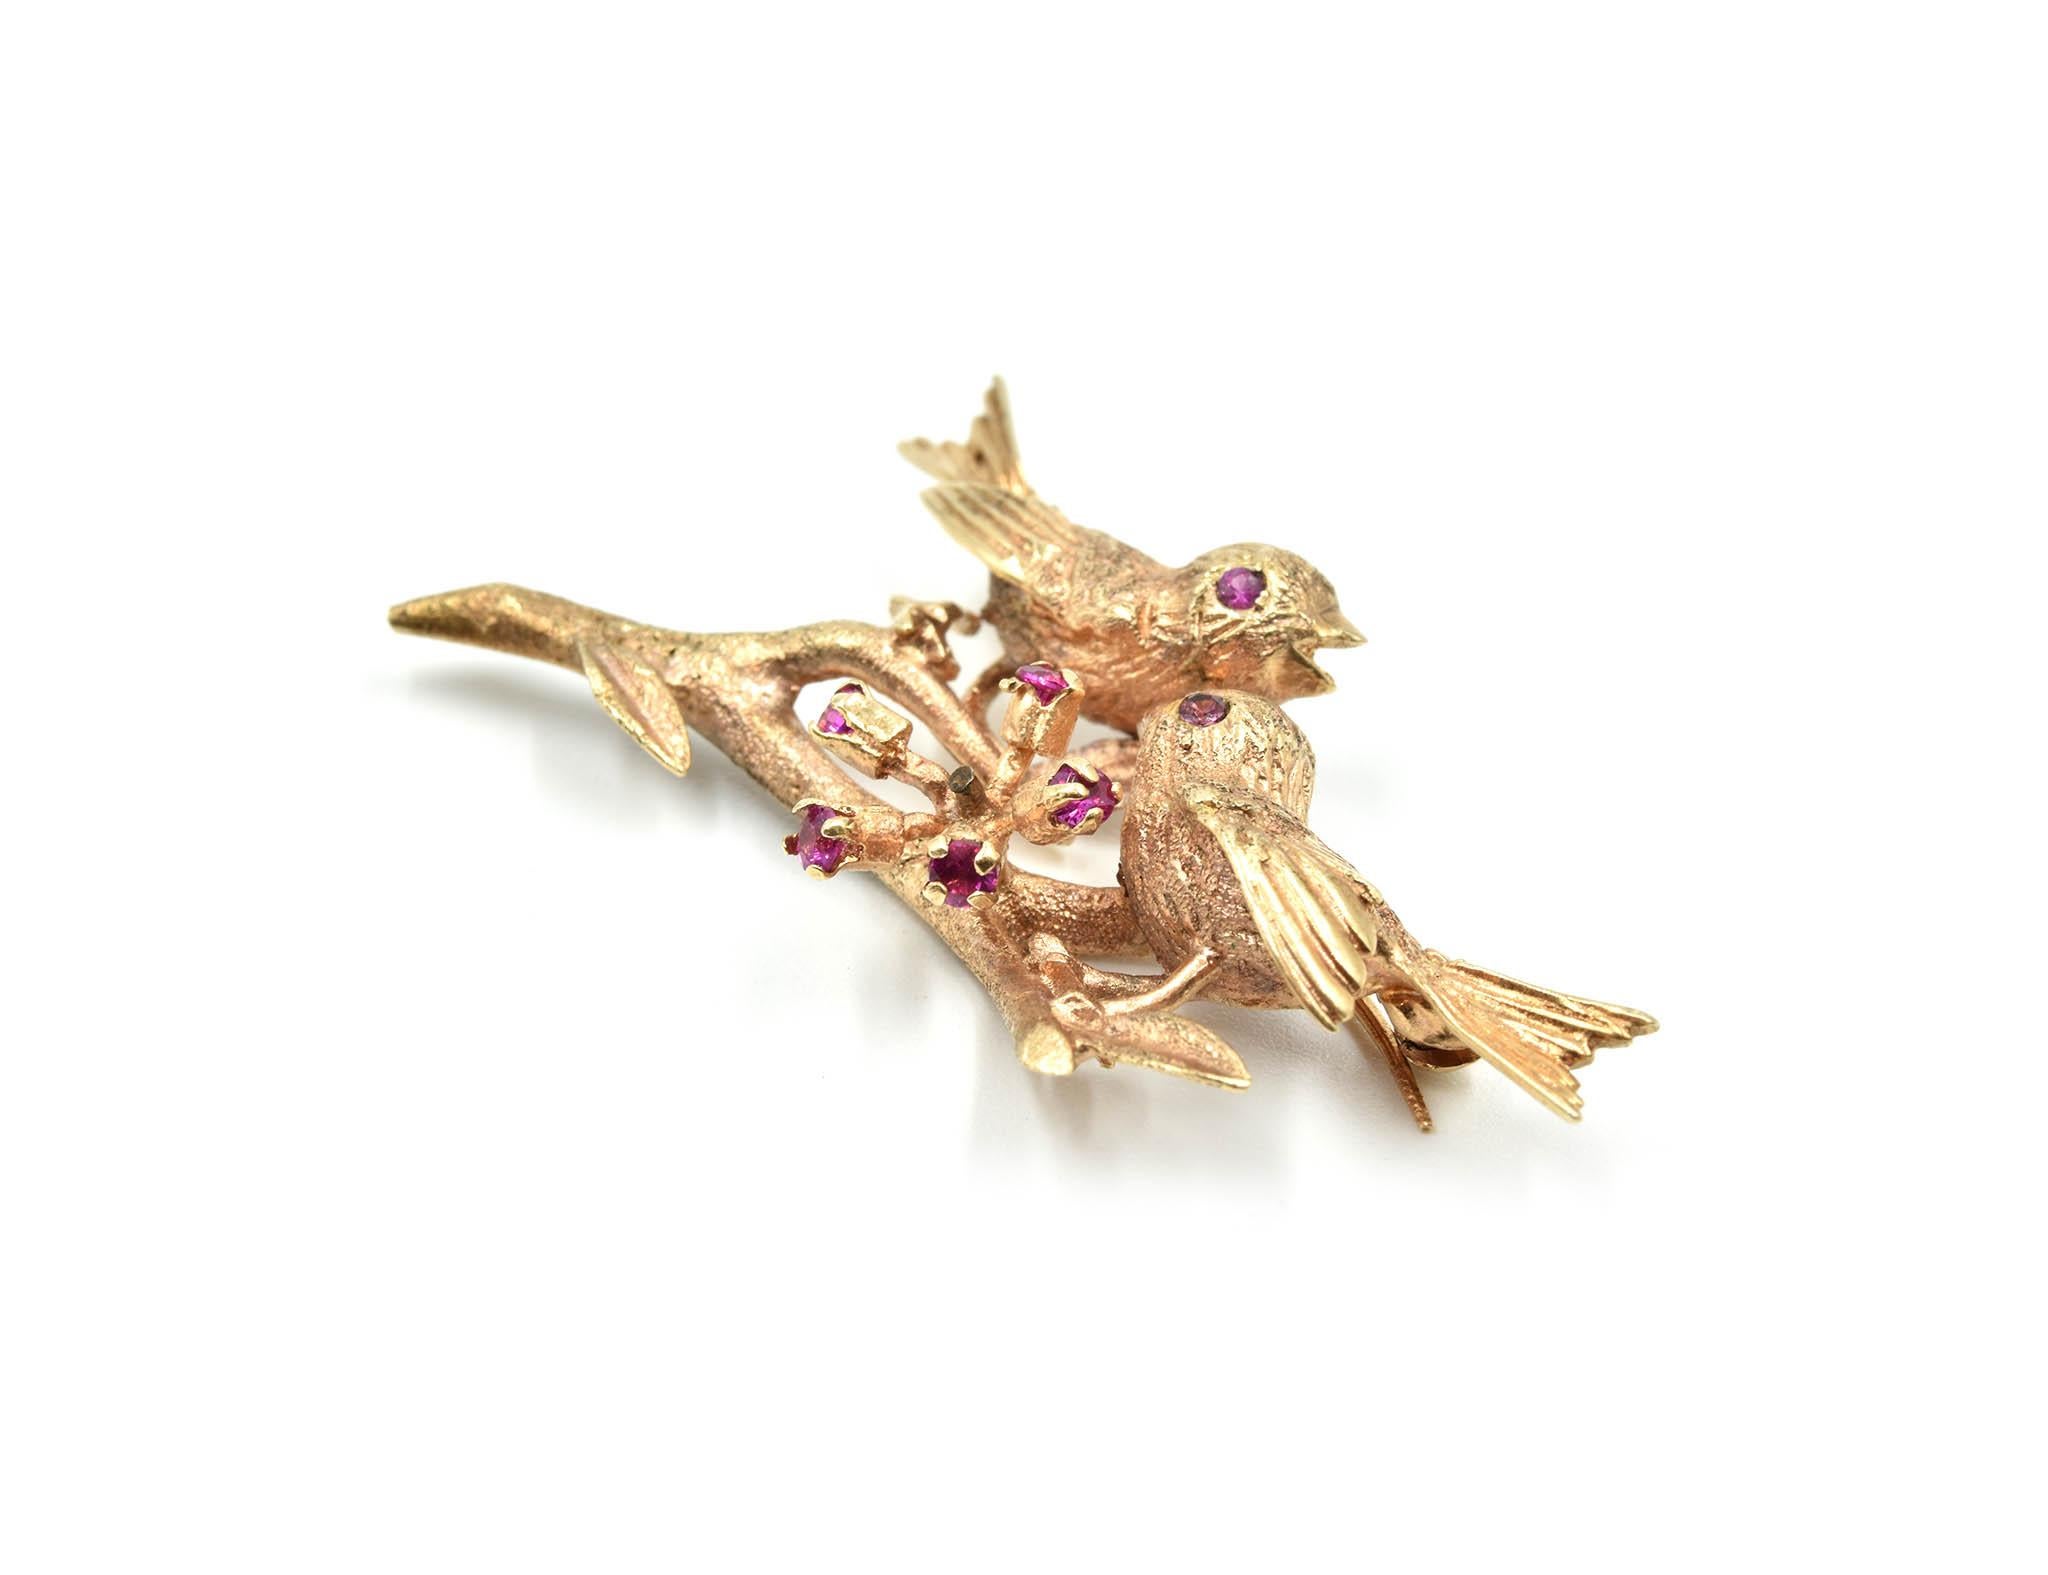 This antique pin illustrates two birds on a tree branch with ruby accents! The pin is made in 14k yellow gold with Victorian style designs made on it. The bird pin has no border and is held by the yellow gold tree branch. 5 rubies are prong set in